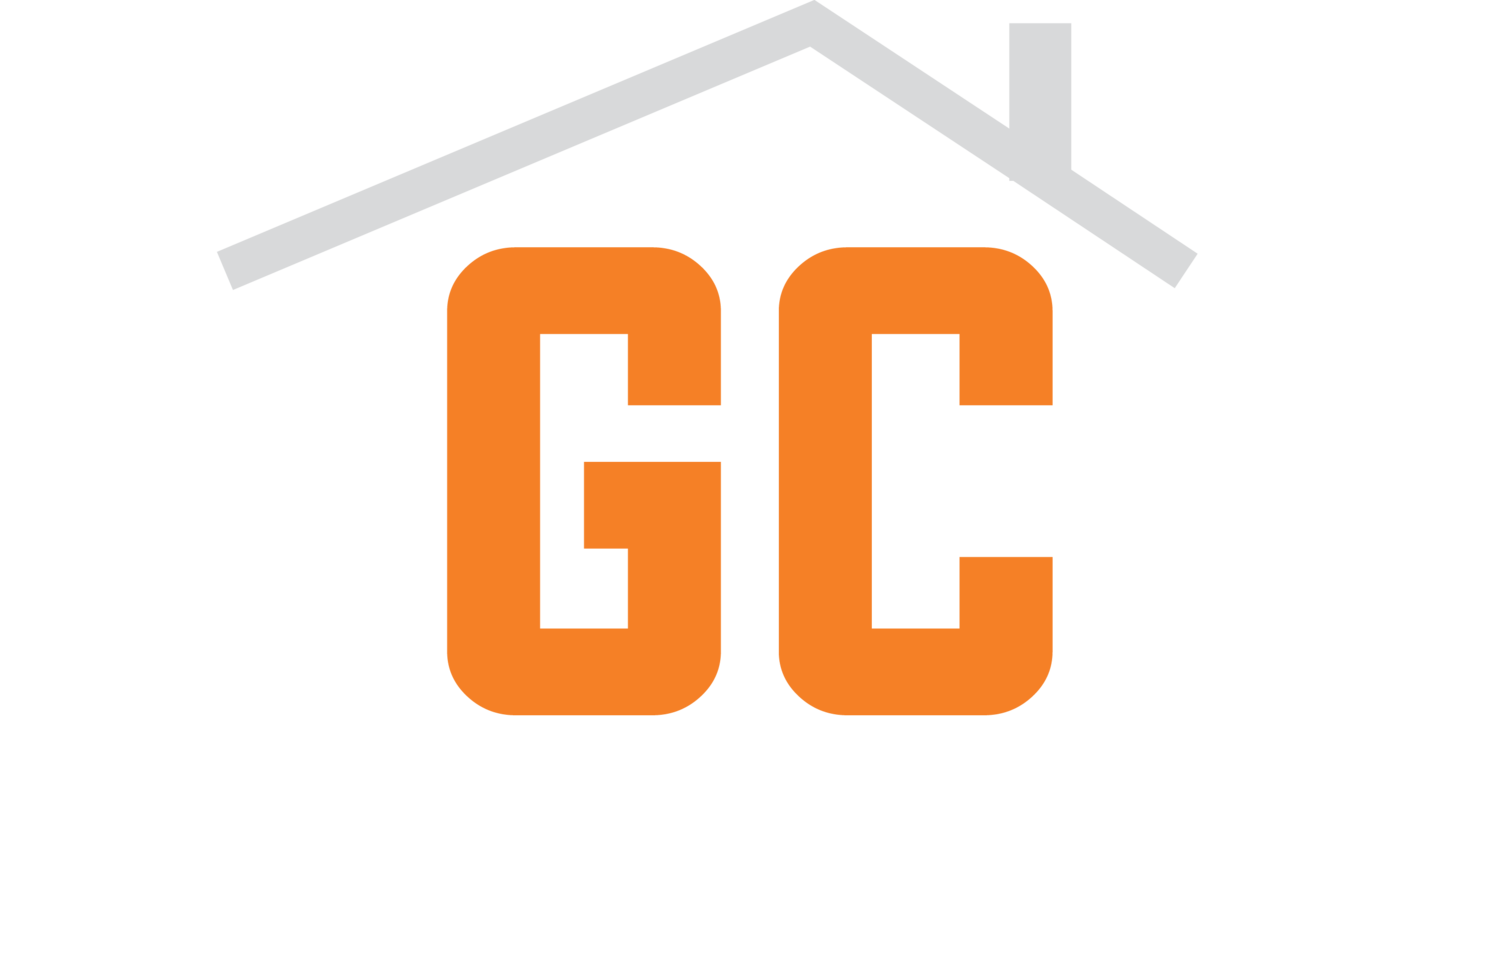 Groth Construct